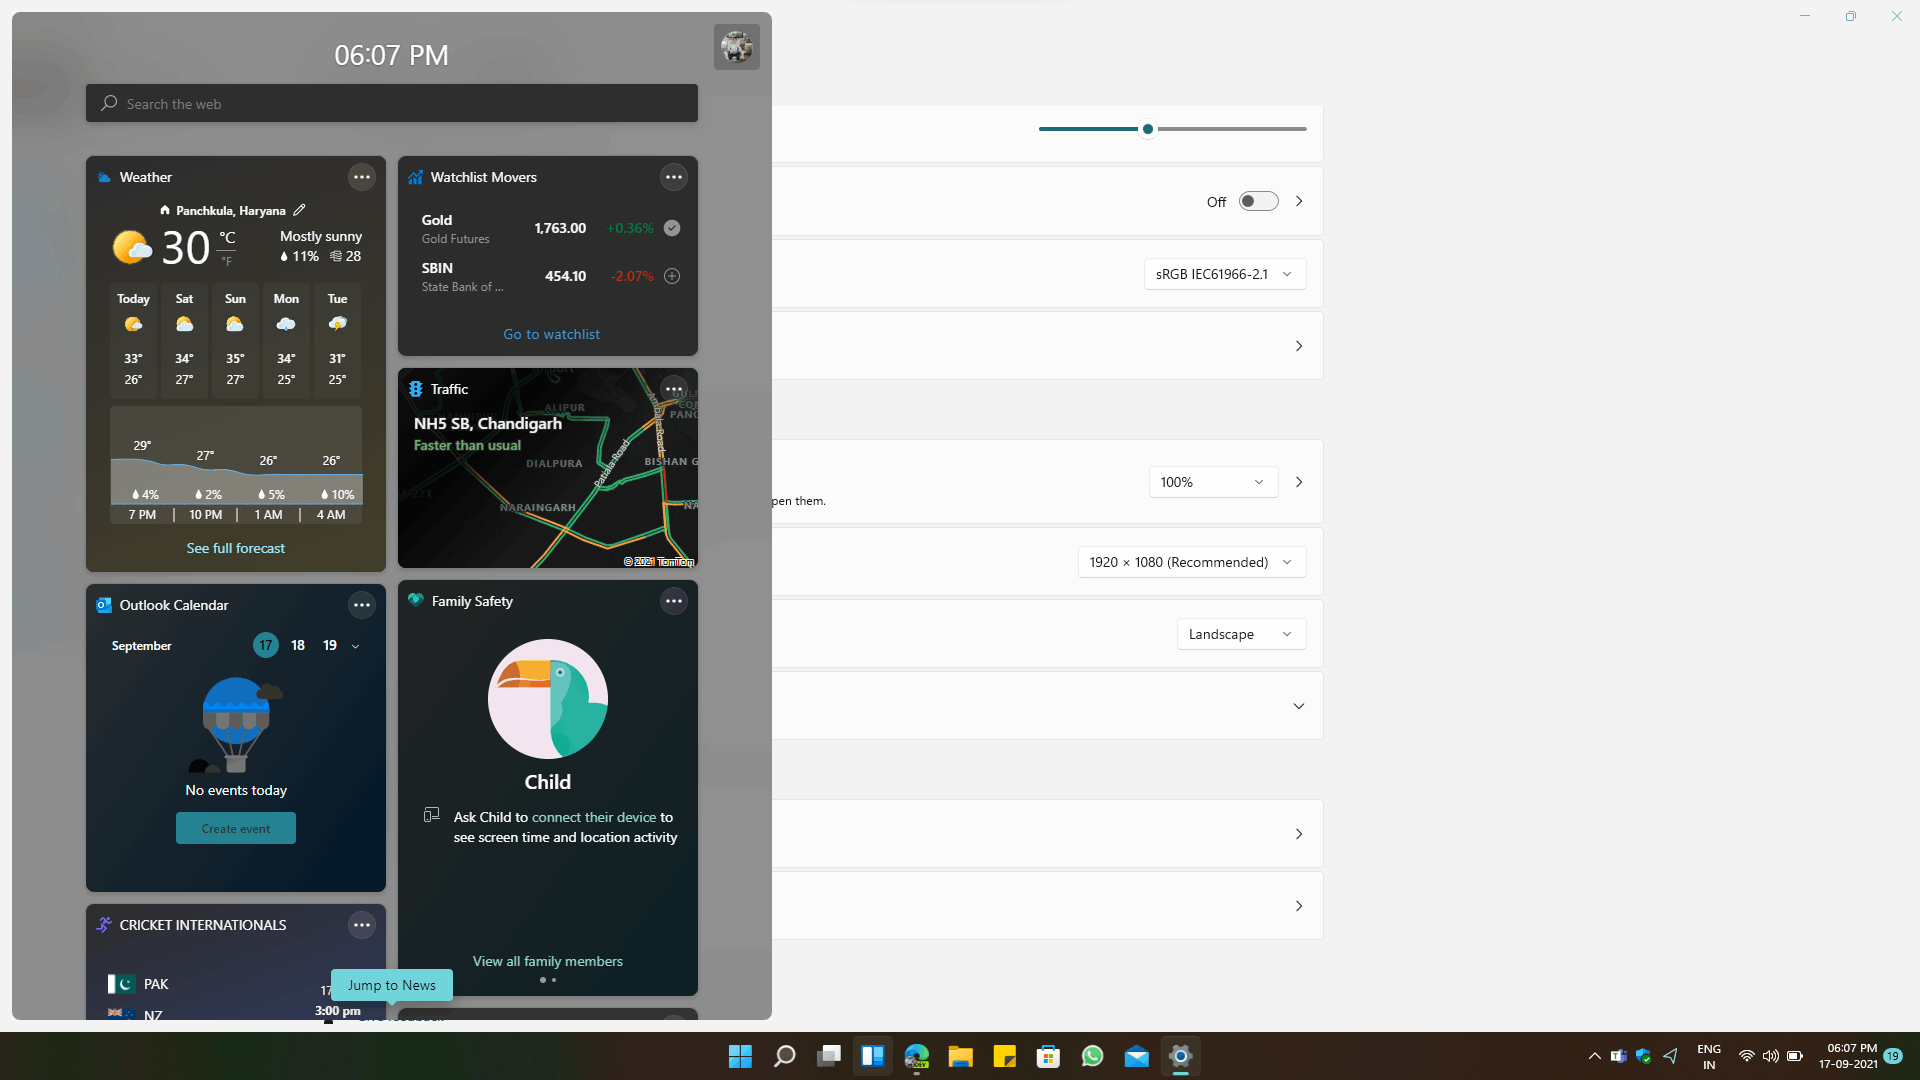 Windows 11 adds a full screen button to the Widgets board in the stable channel 25cbb97a-2015-4968-98e7-54eb0d2a767e?upload=true.png